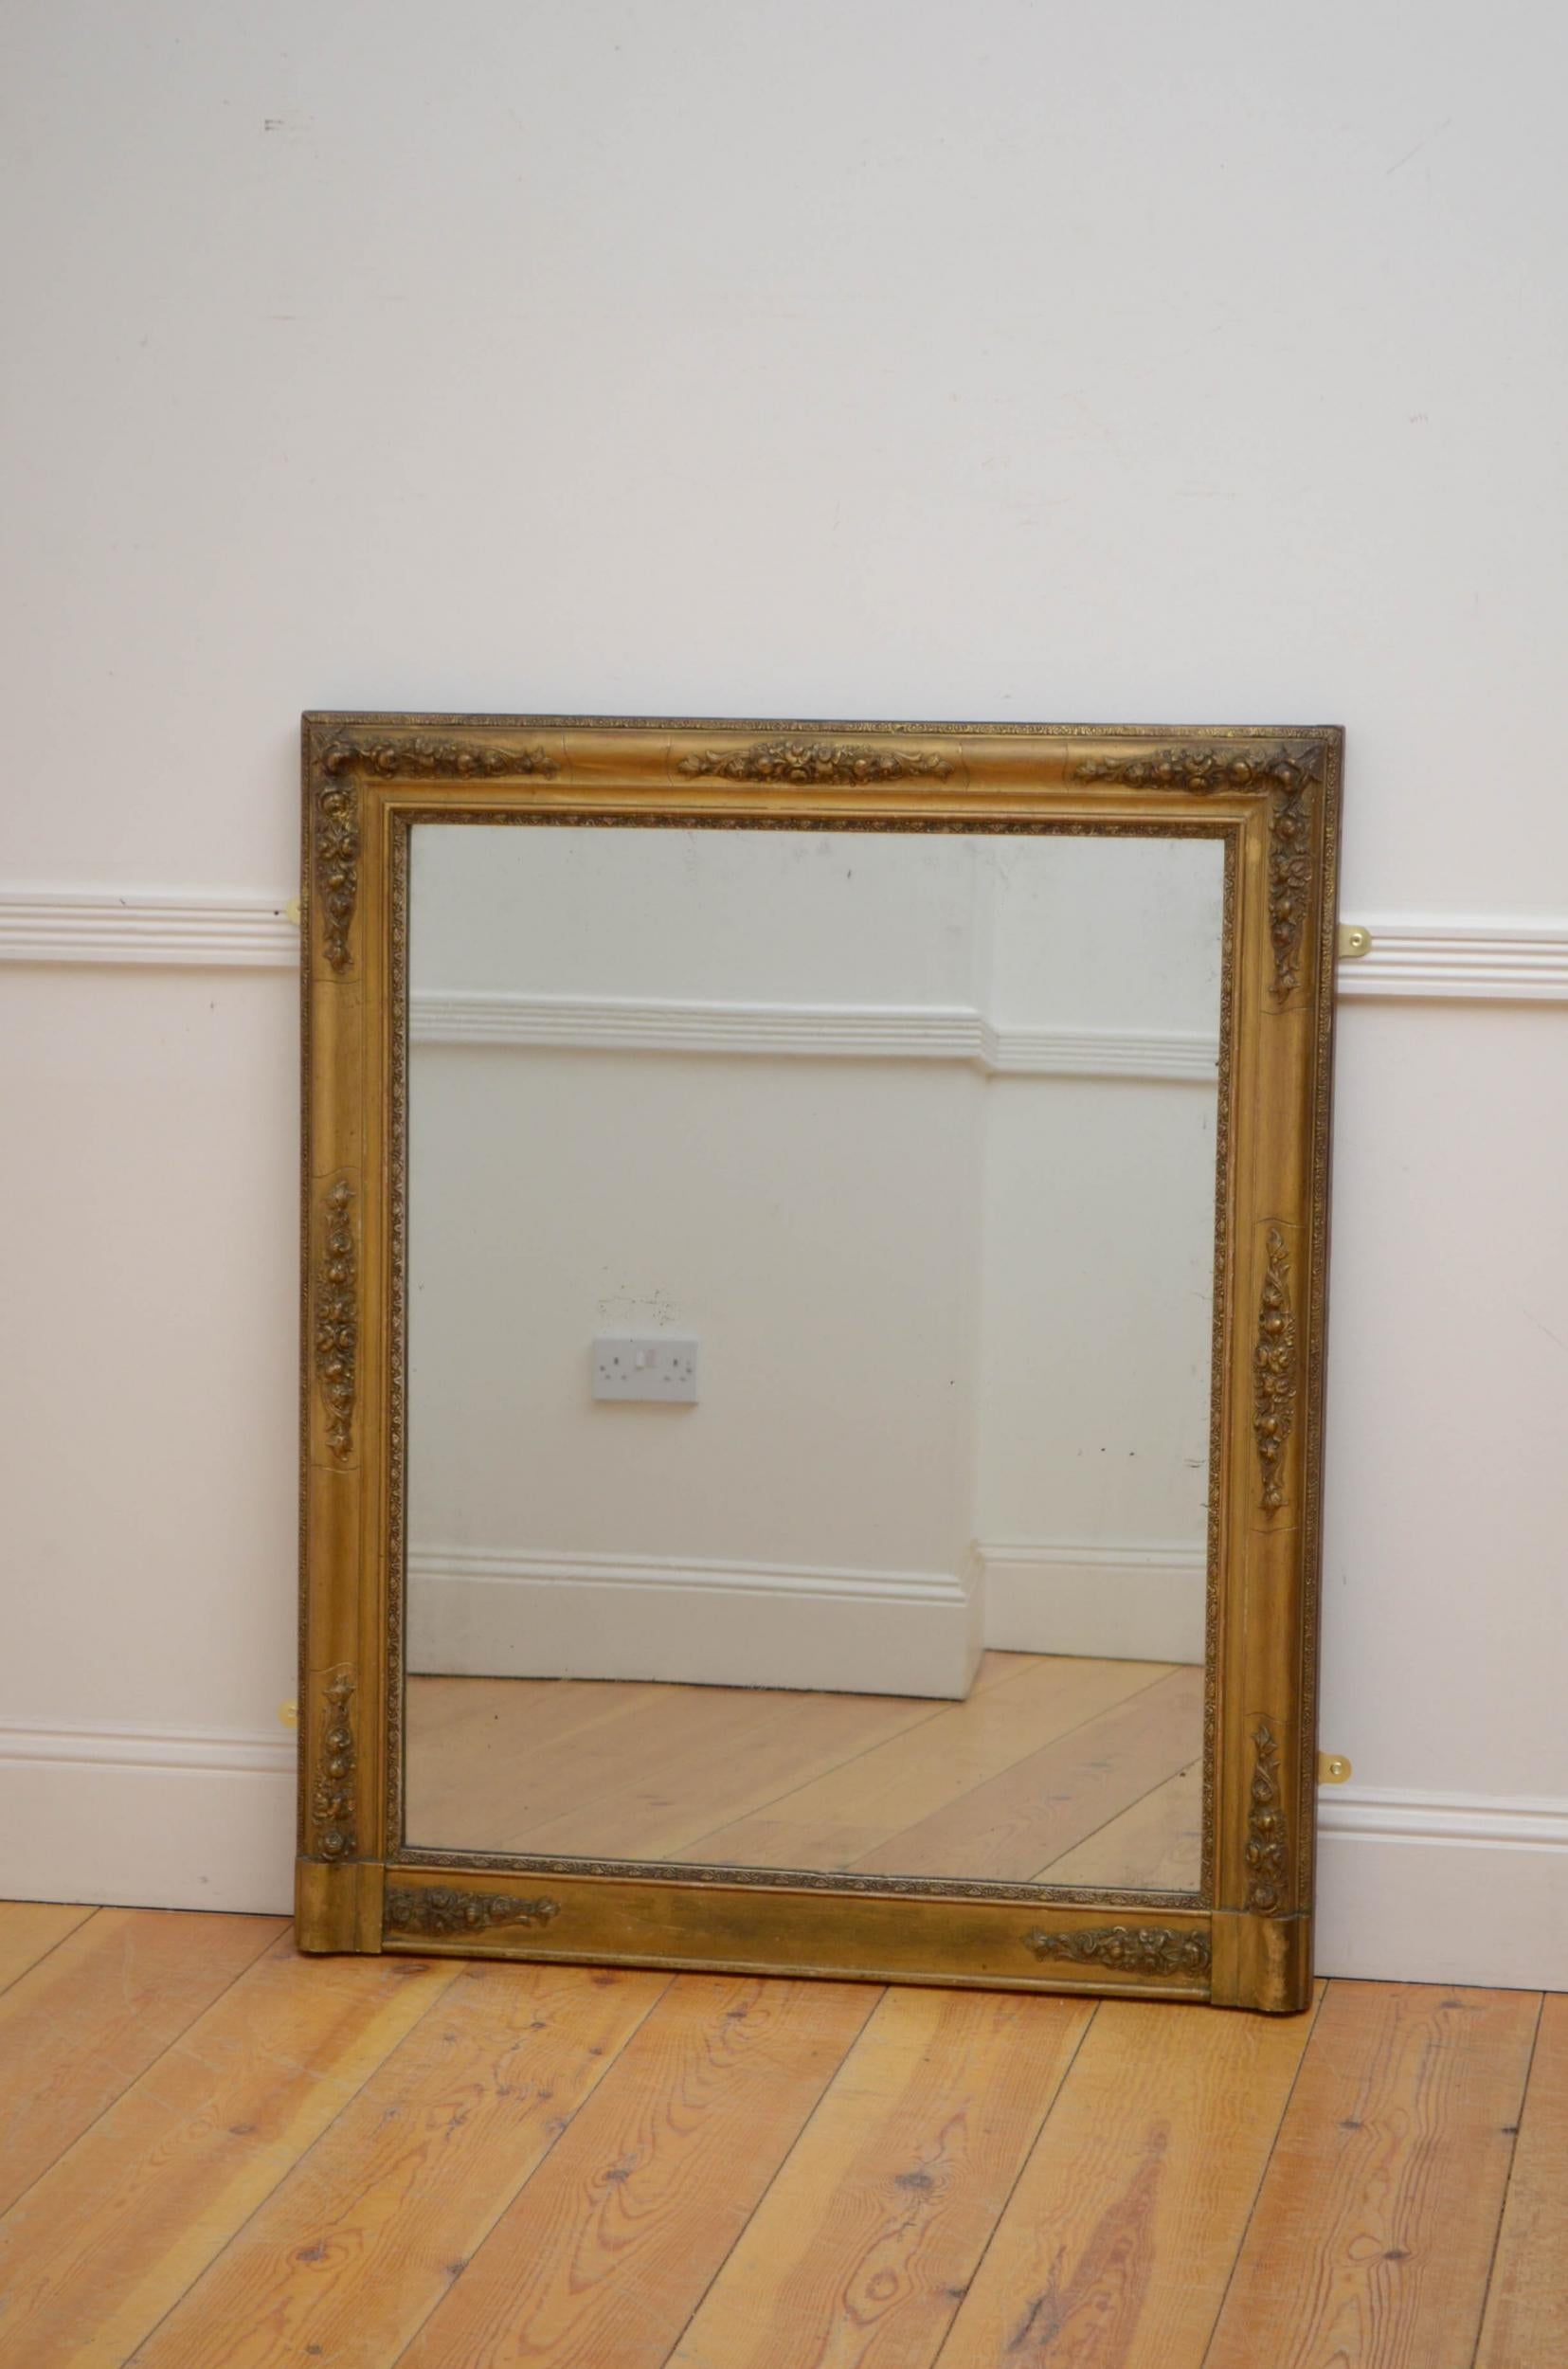 Sn5104 Simple and elegant French giltwood mirror, having original foxed glass in moulded and flower carved frame. This antiuqe mirror retains its original glass and original backboards with some refinishing to the gilt, all in wonderful home ready